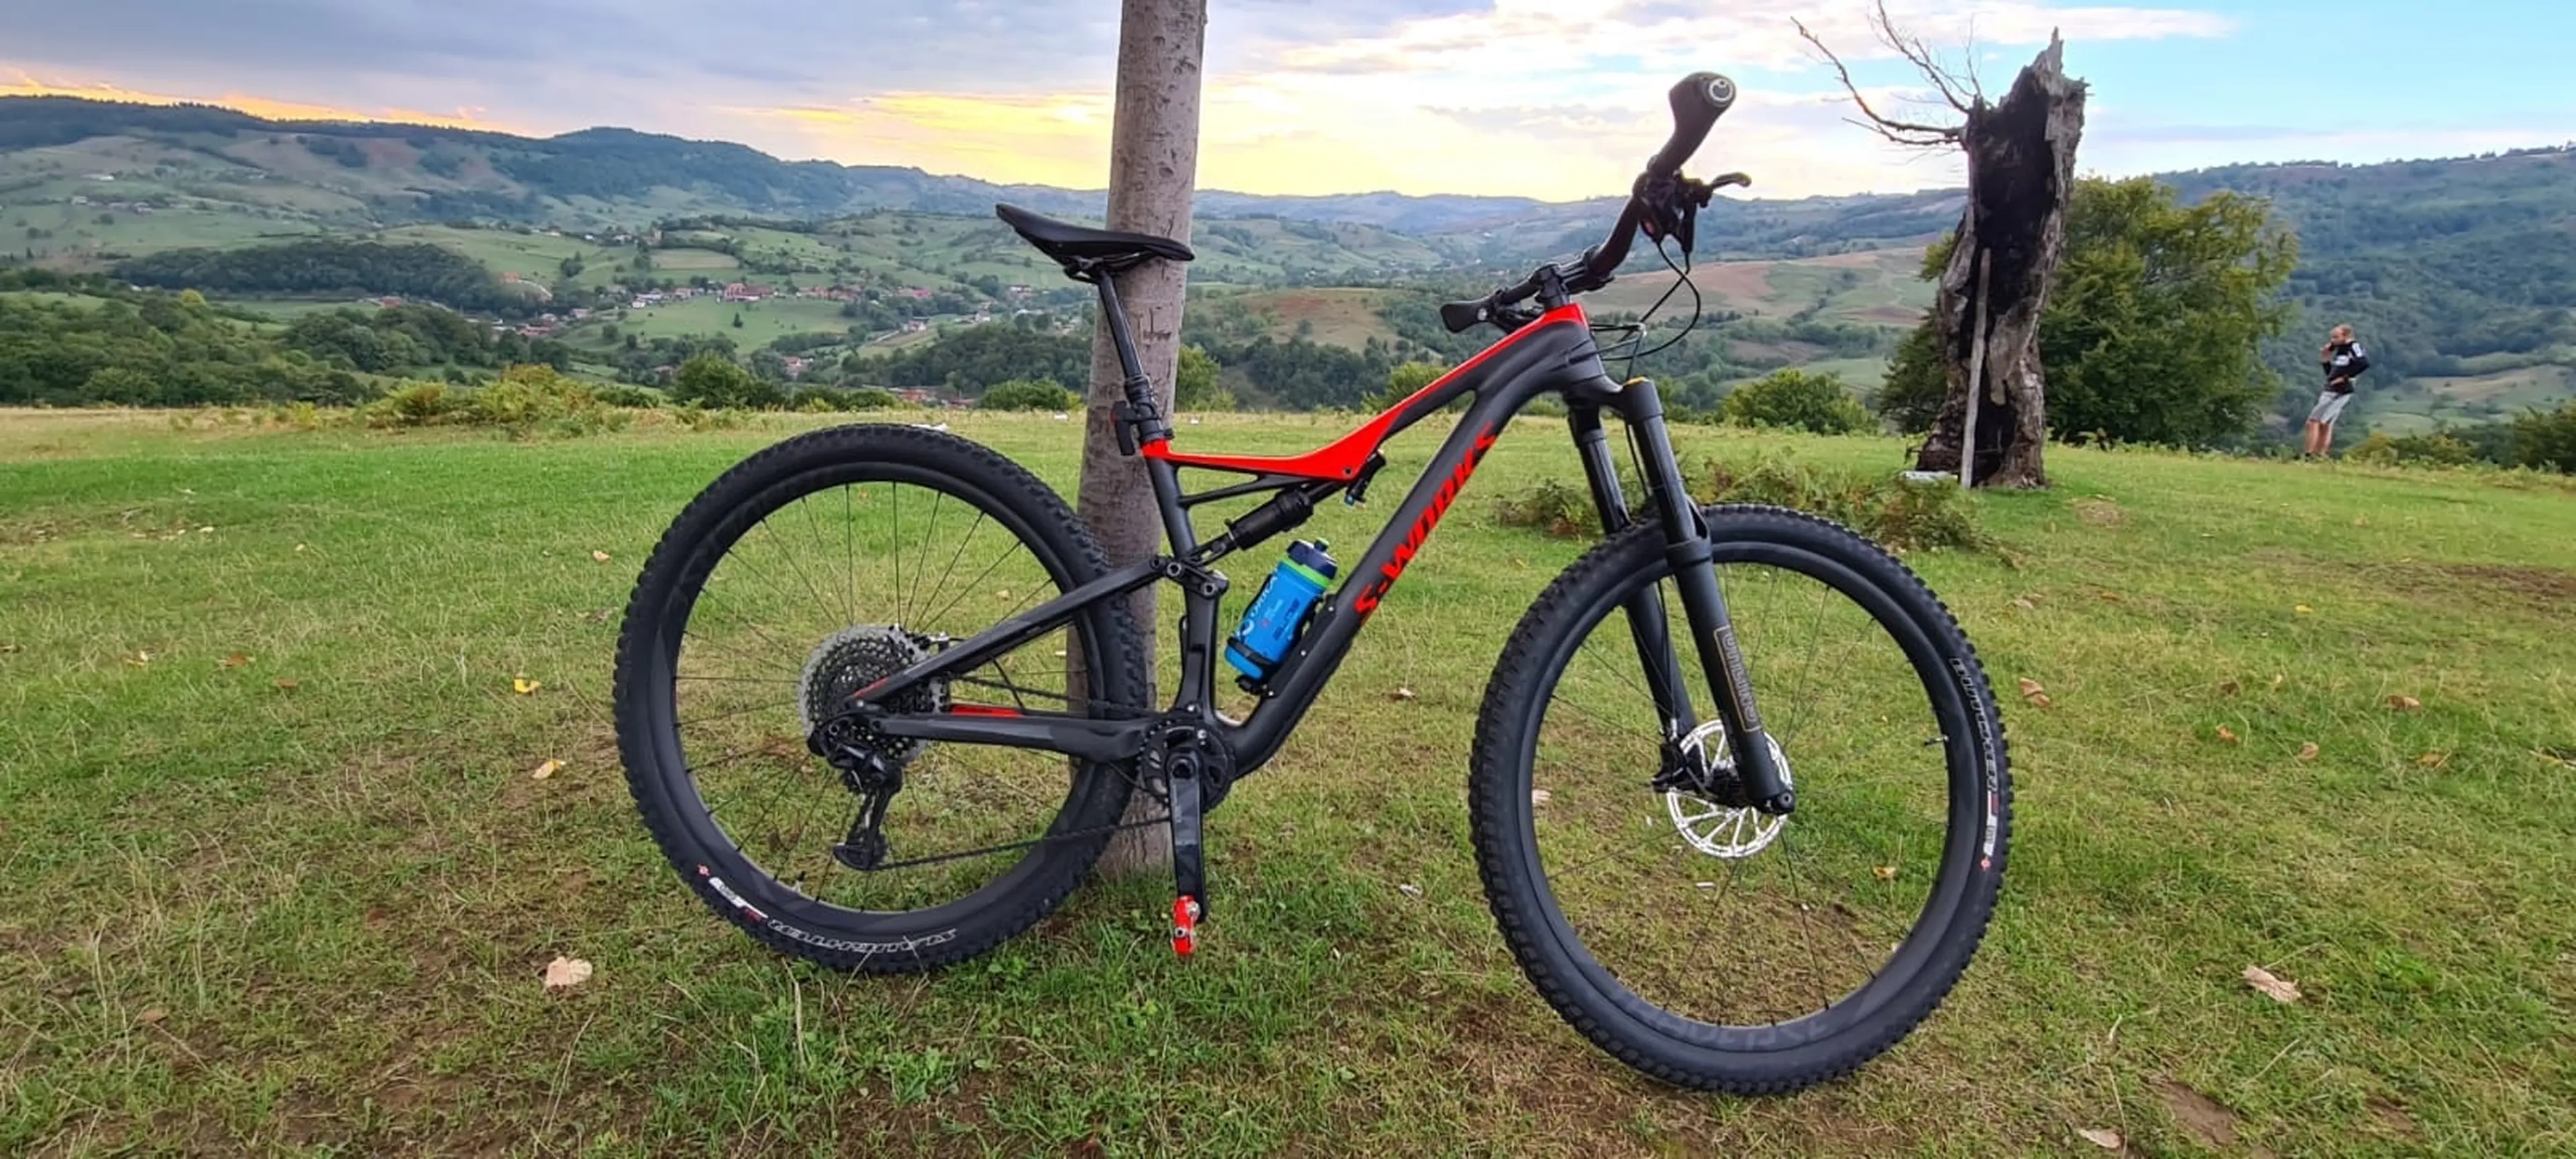 Image MTB SPECIALIZED S-Works full carbon